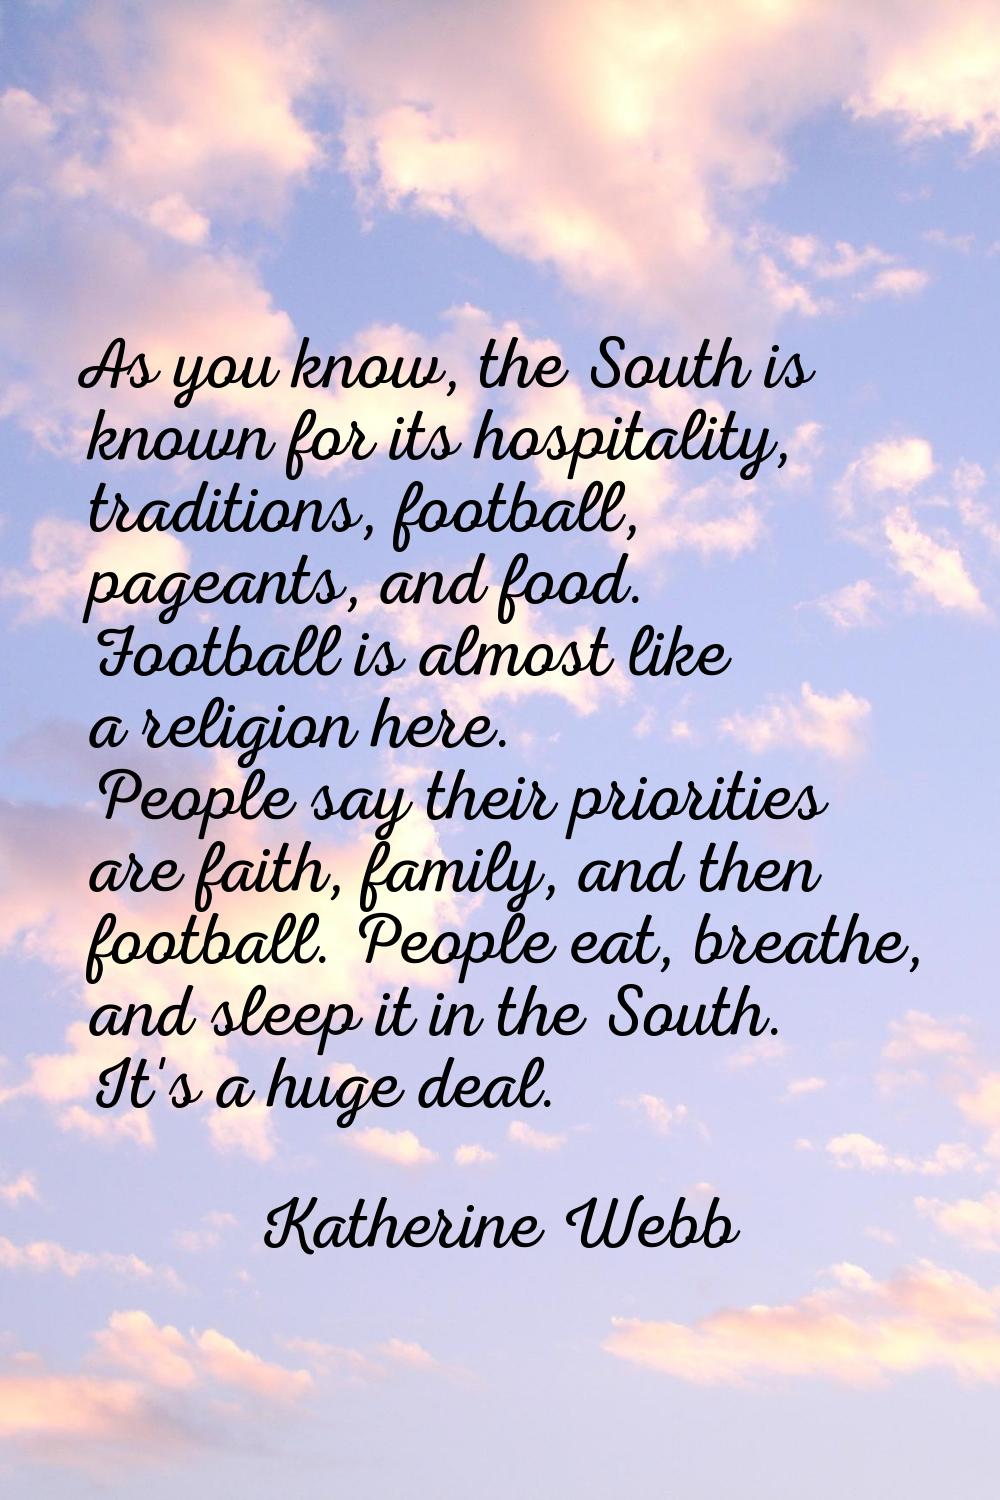 As you know, the South is known for its hospitality, traditions, football, pageants, and food. Foot